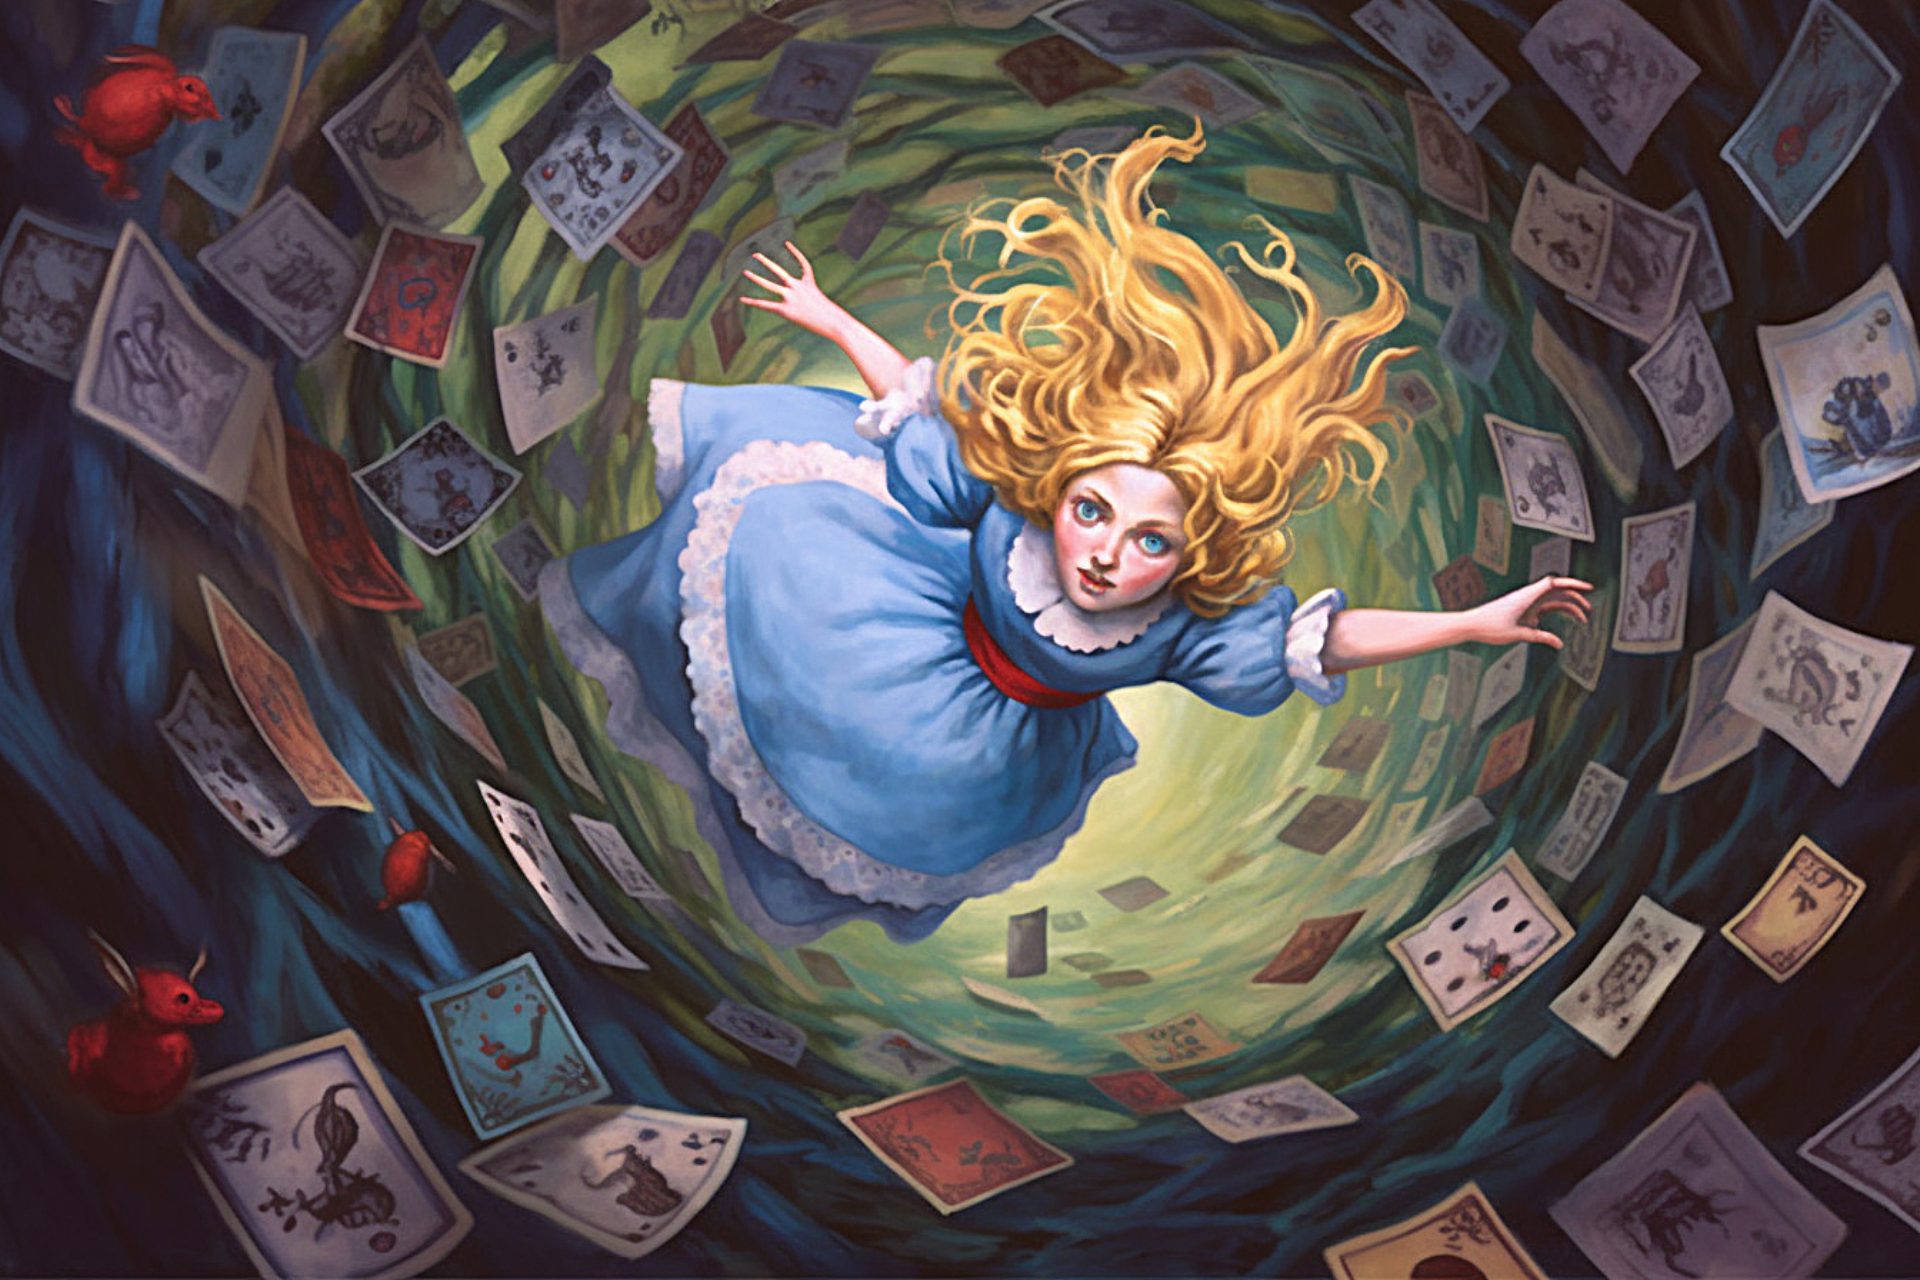 “Alice in Wonderland” — Meaning, Themes, and Symbols